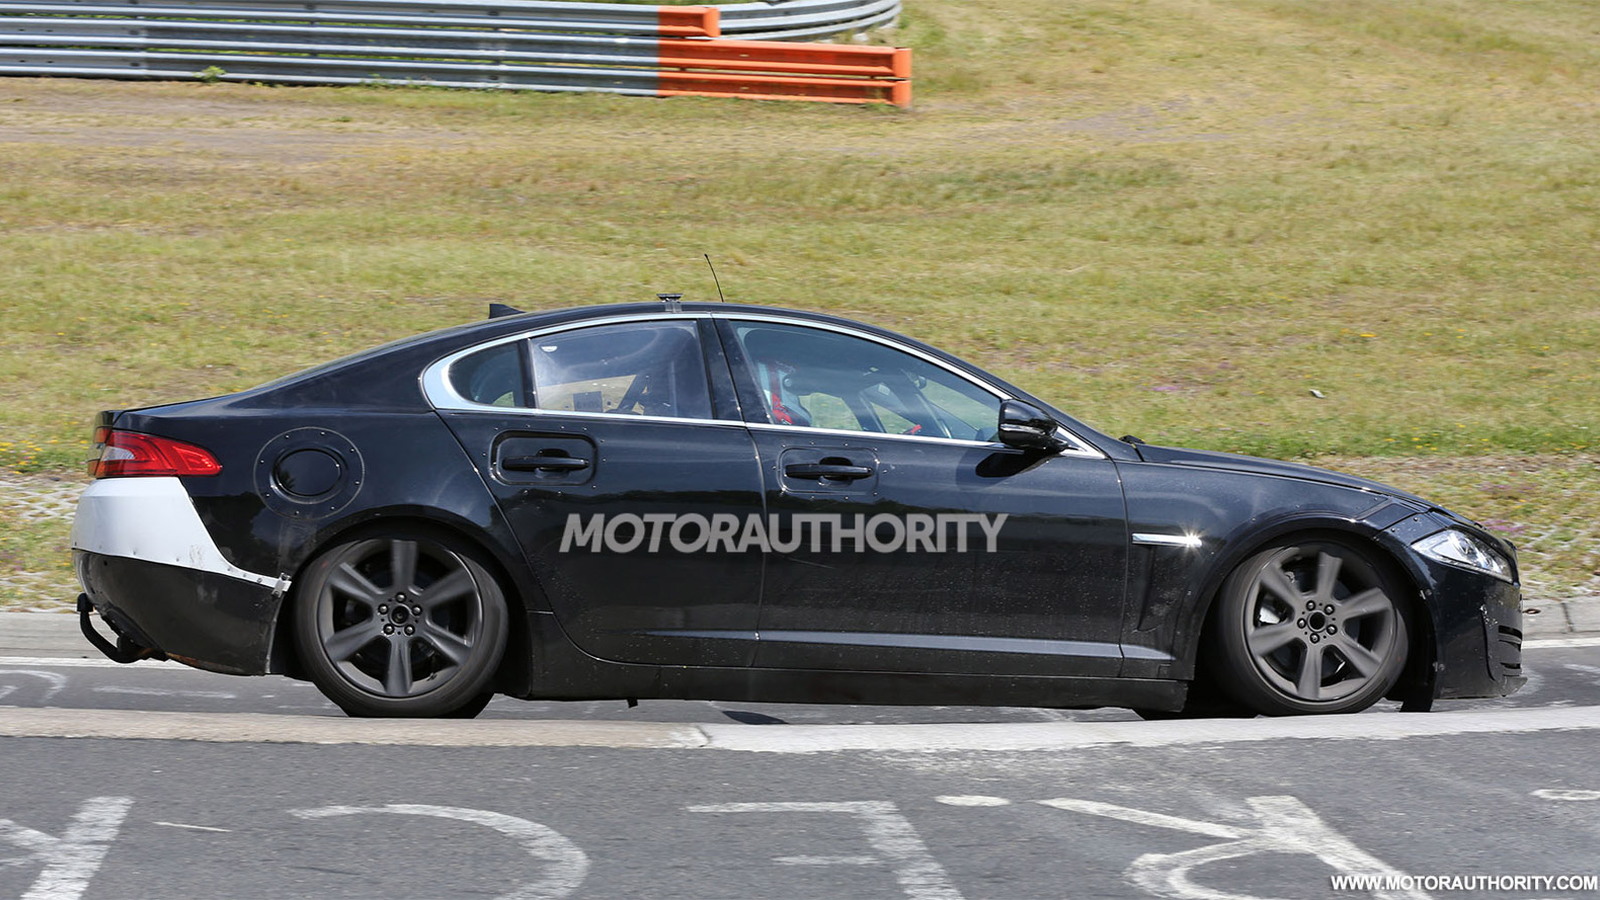 2016 Jaguar XS To Feature Aluminum Construction, Spawn Wagon And SUV ...